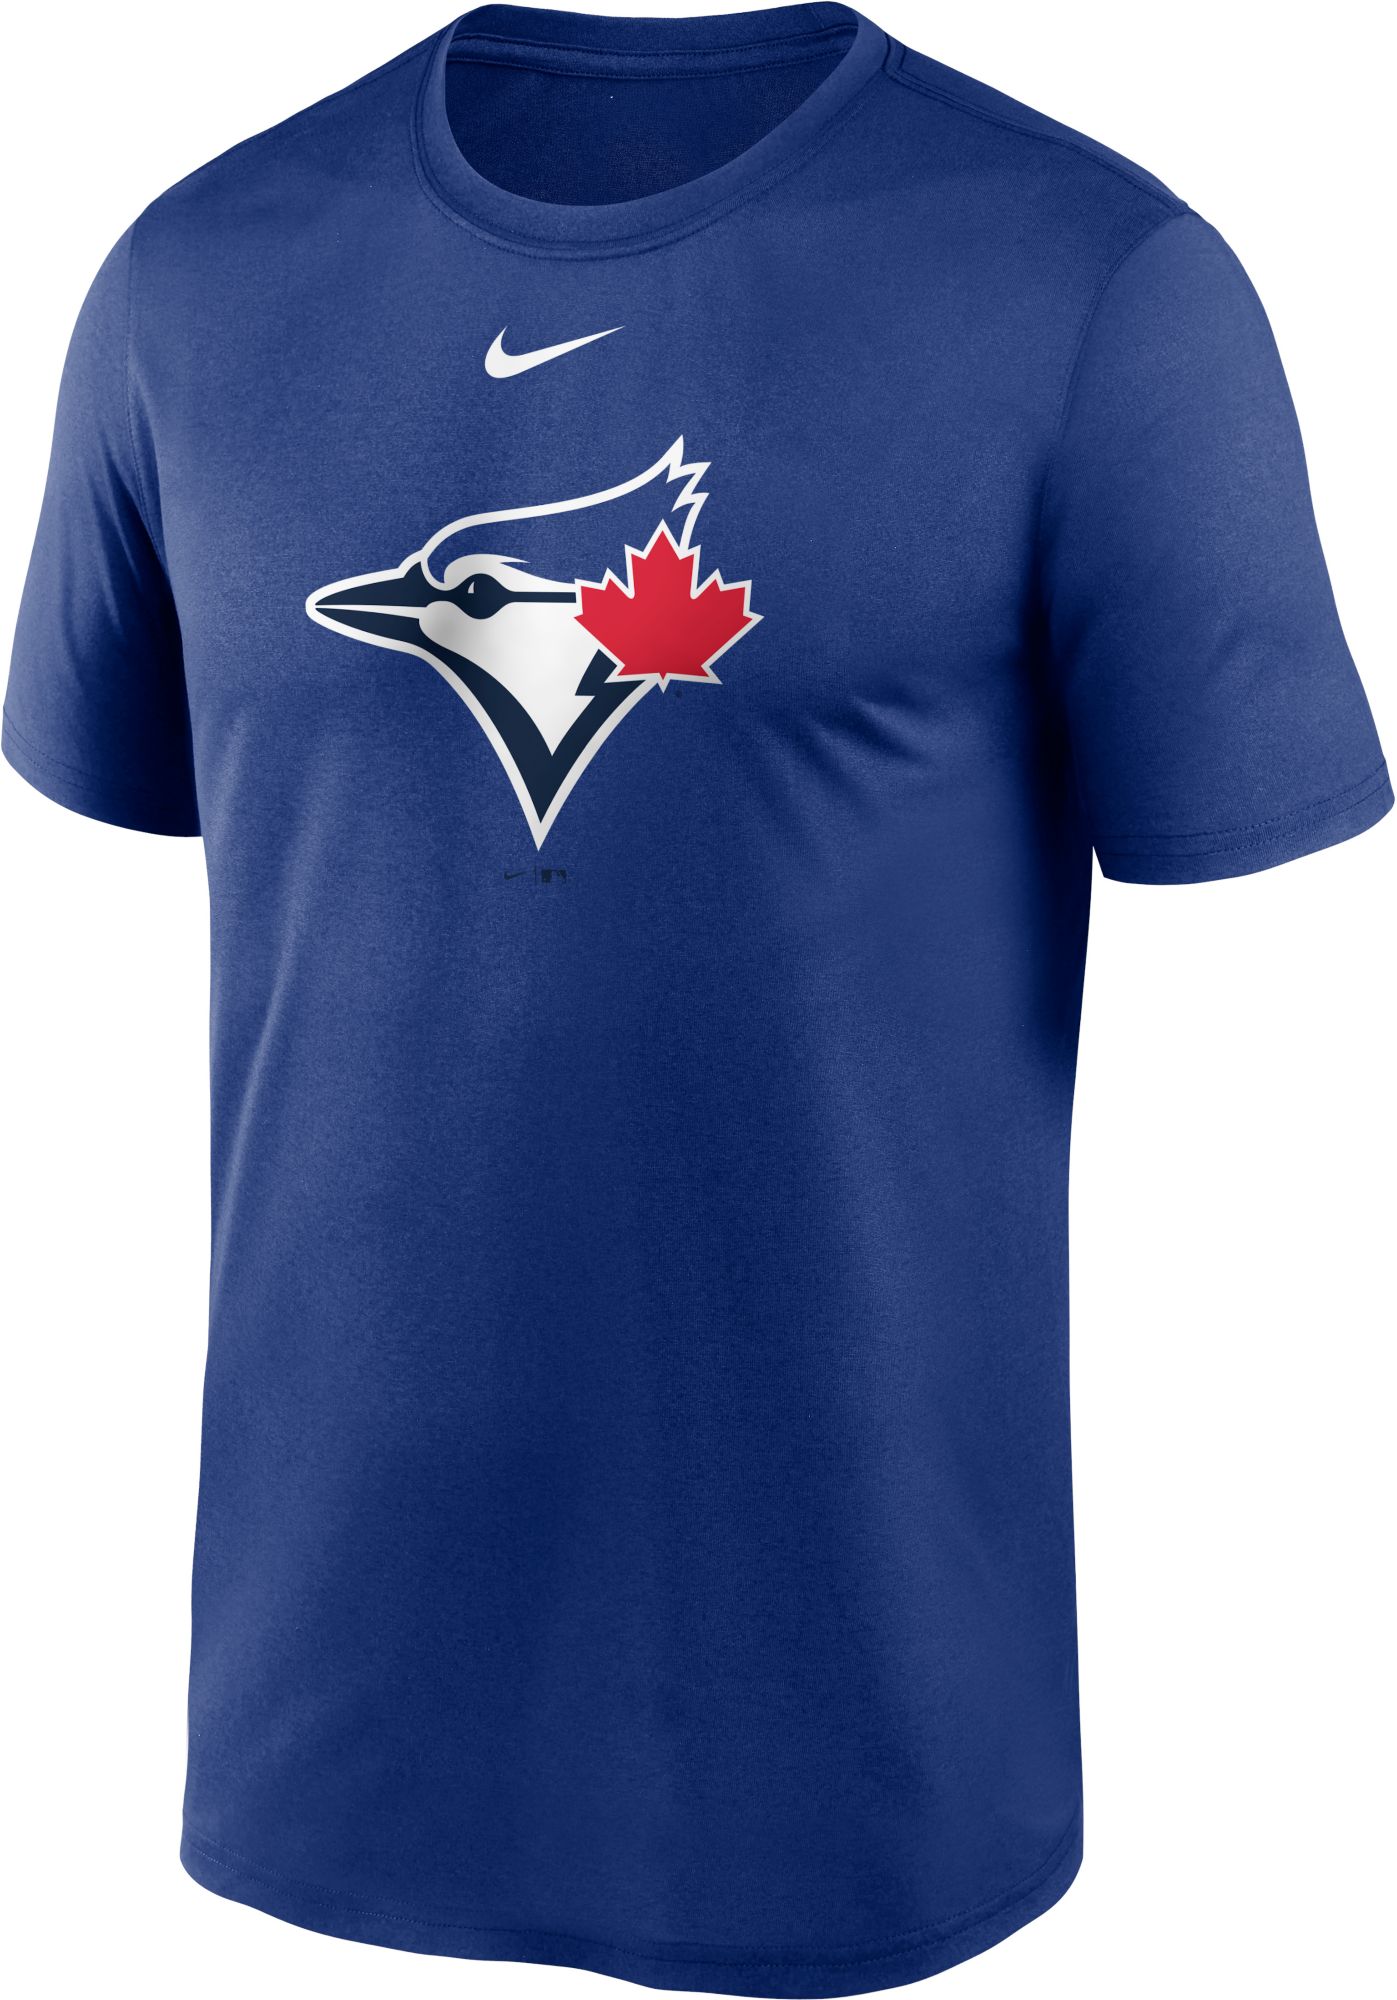 Toronto Blue Jays Apparel & Gear | Curbside Pickup Available at DICK'S